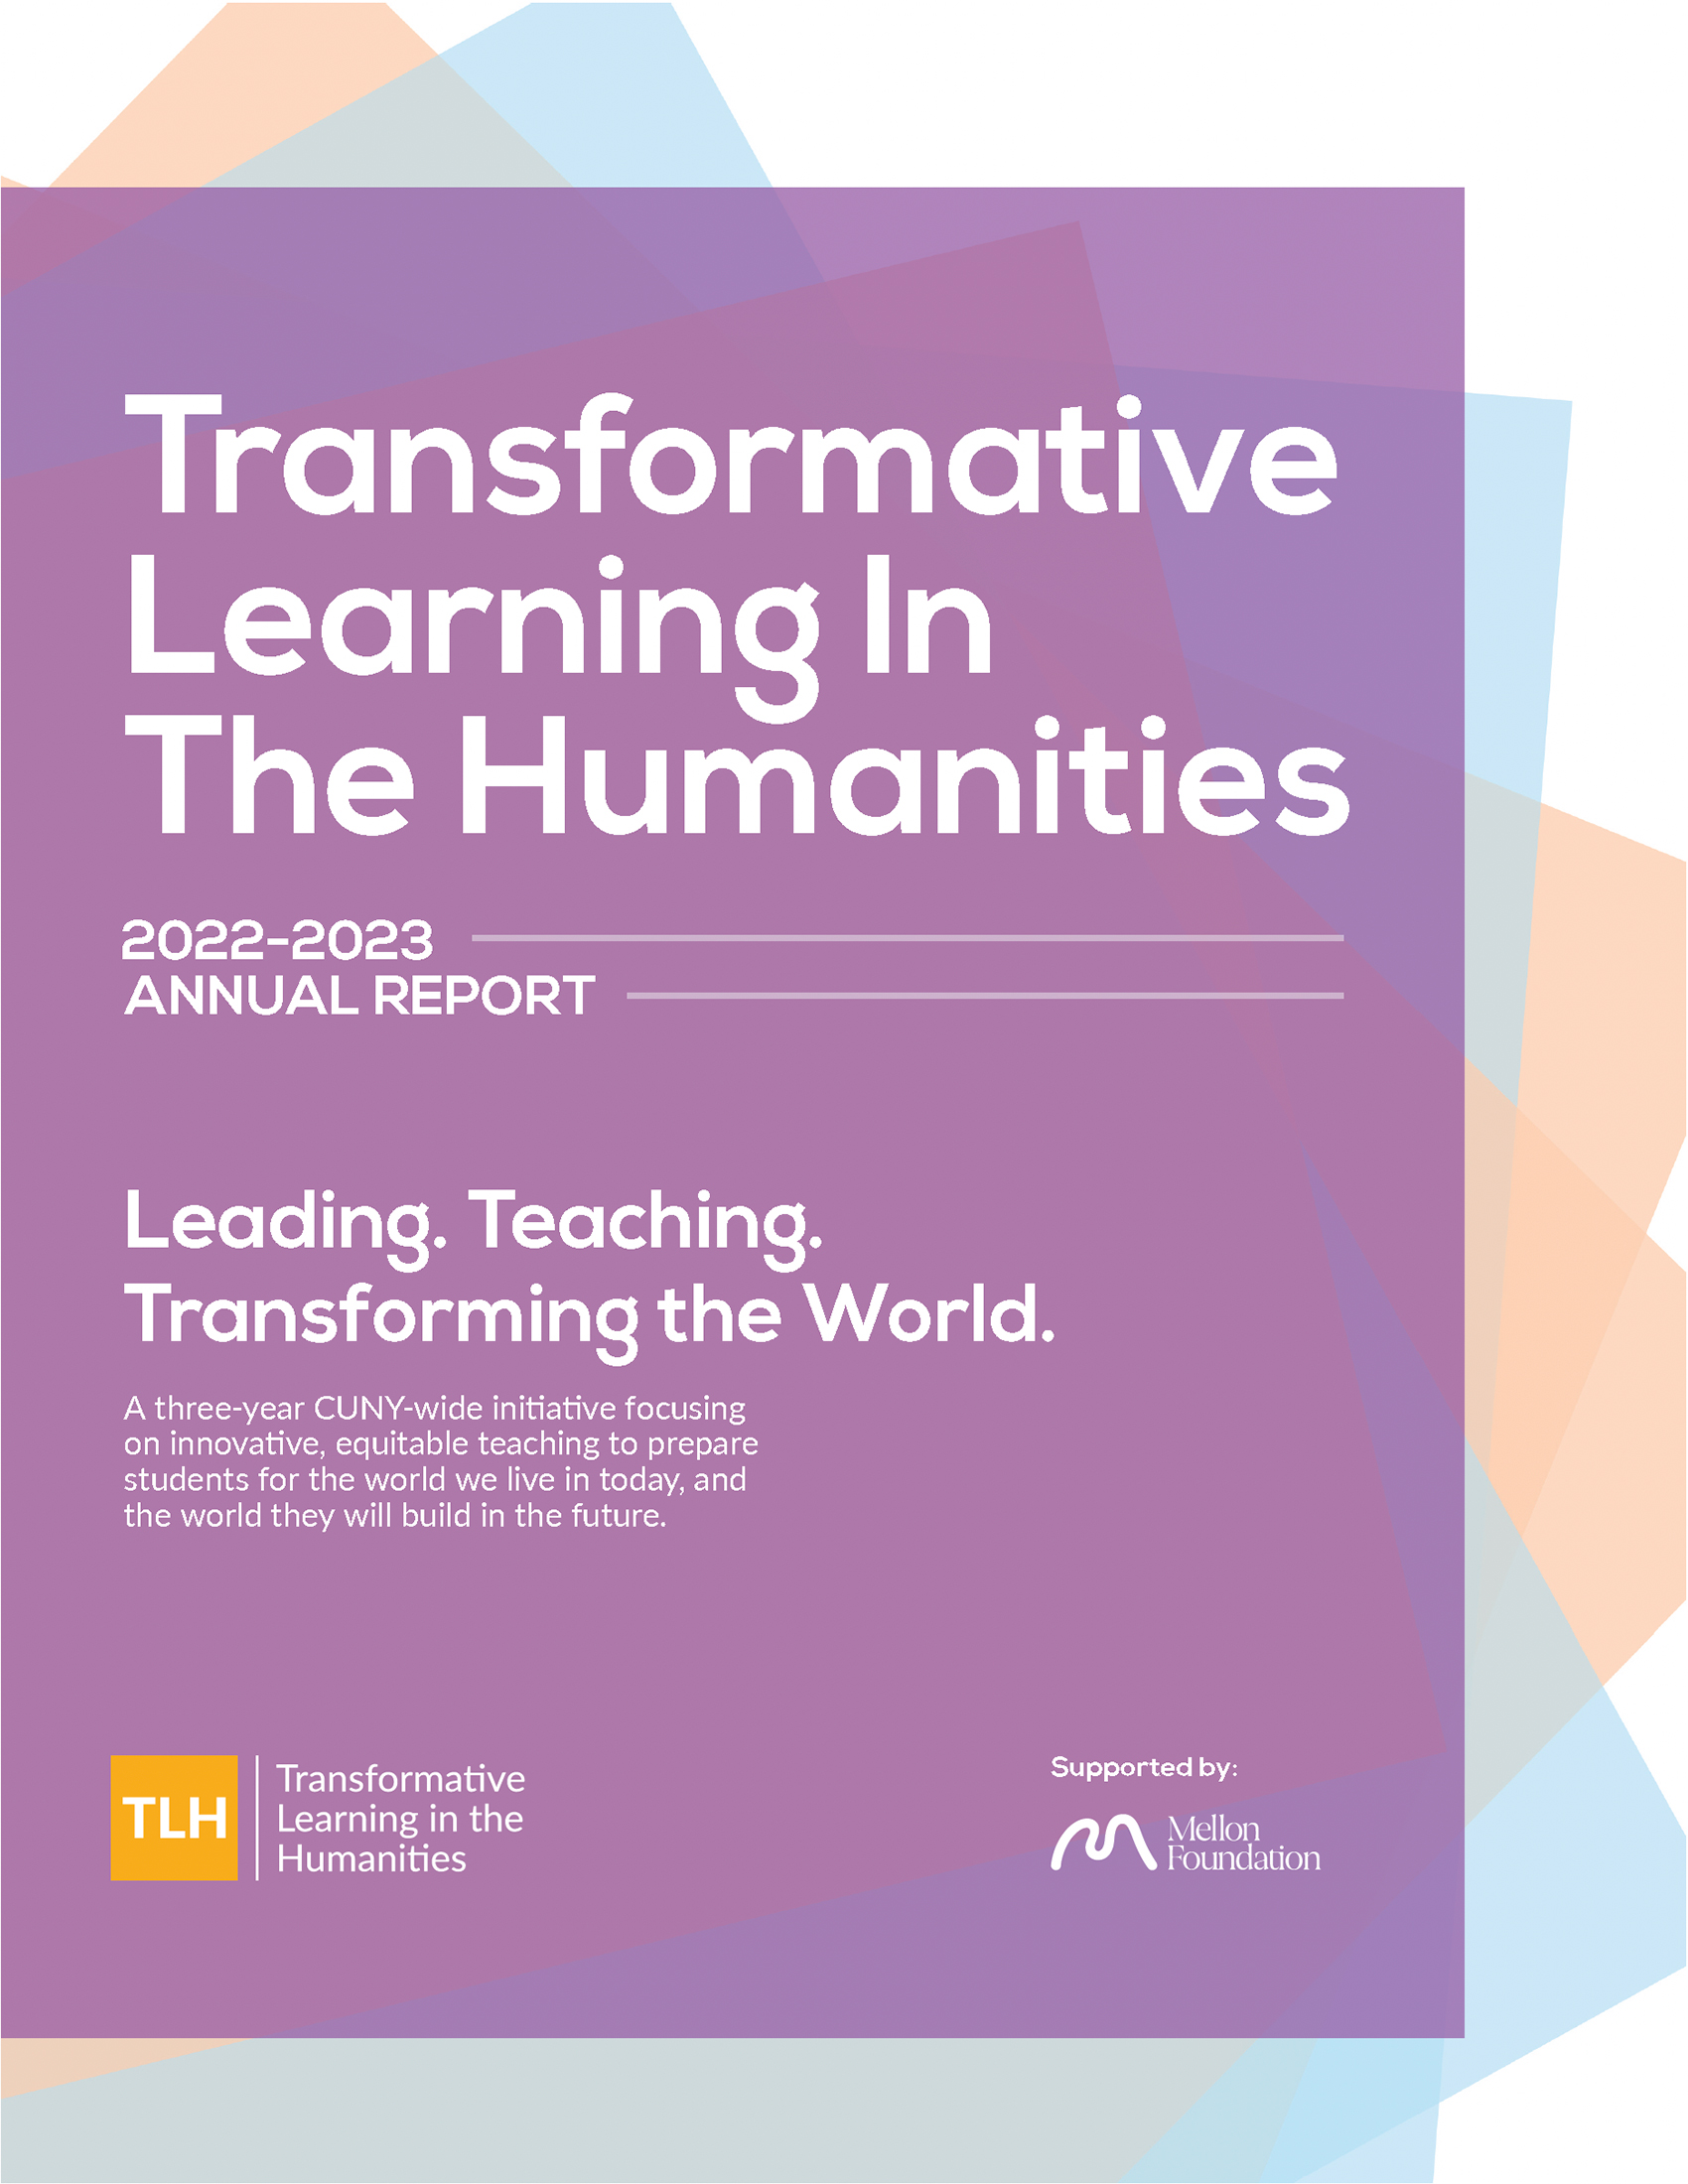 TLH 2022-2023 Annual Report, link opens a PDF